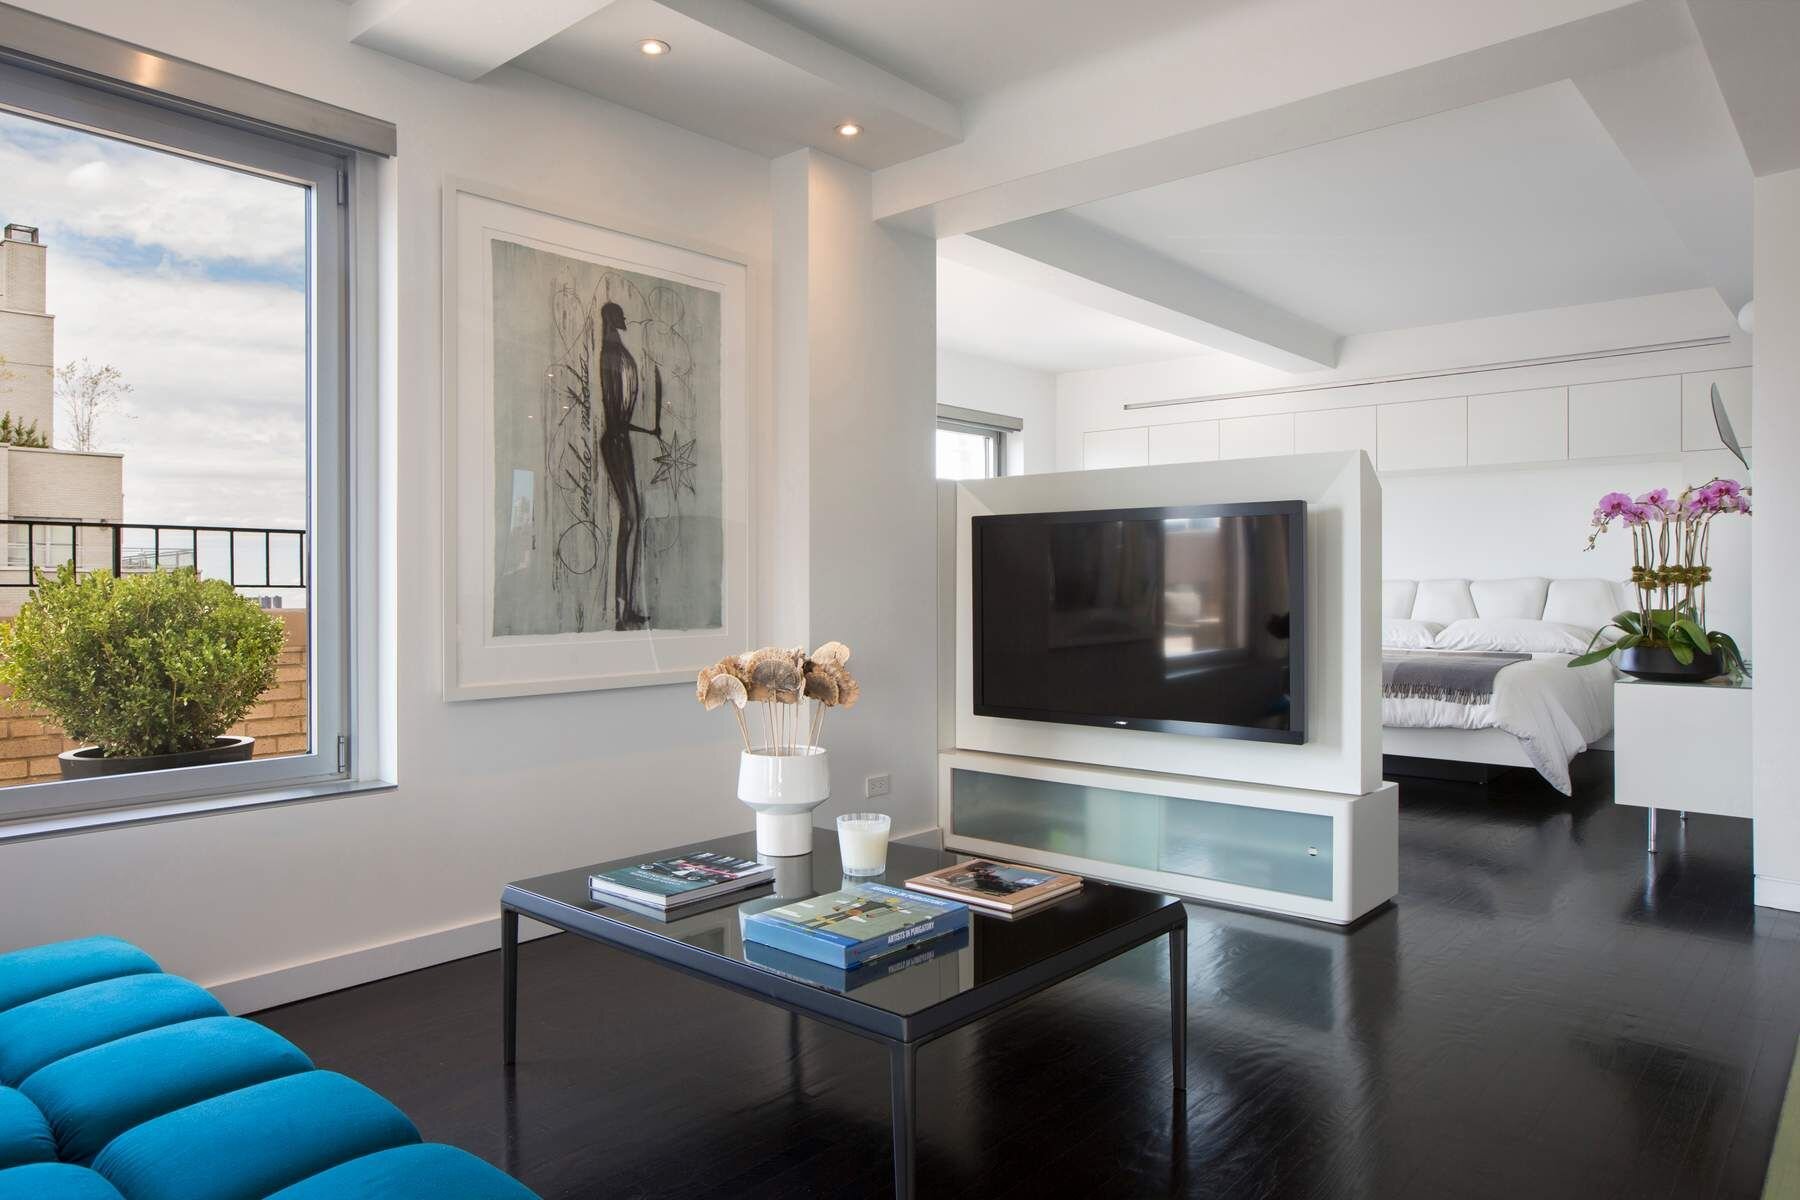 Luxury Real Estate NYC_Martine Capdevielle_411 East 53rd St 5K_10.jpg